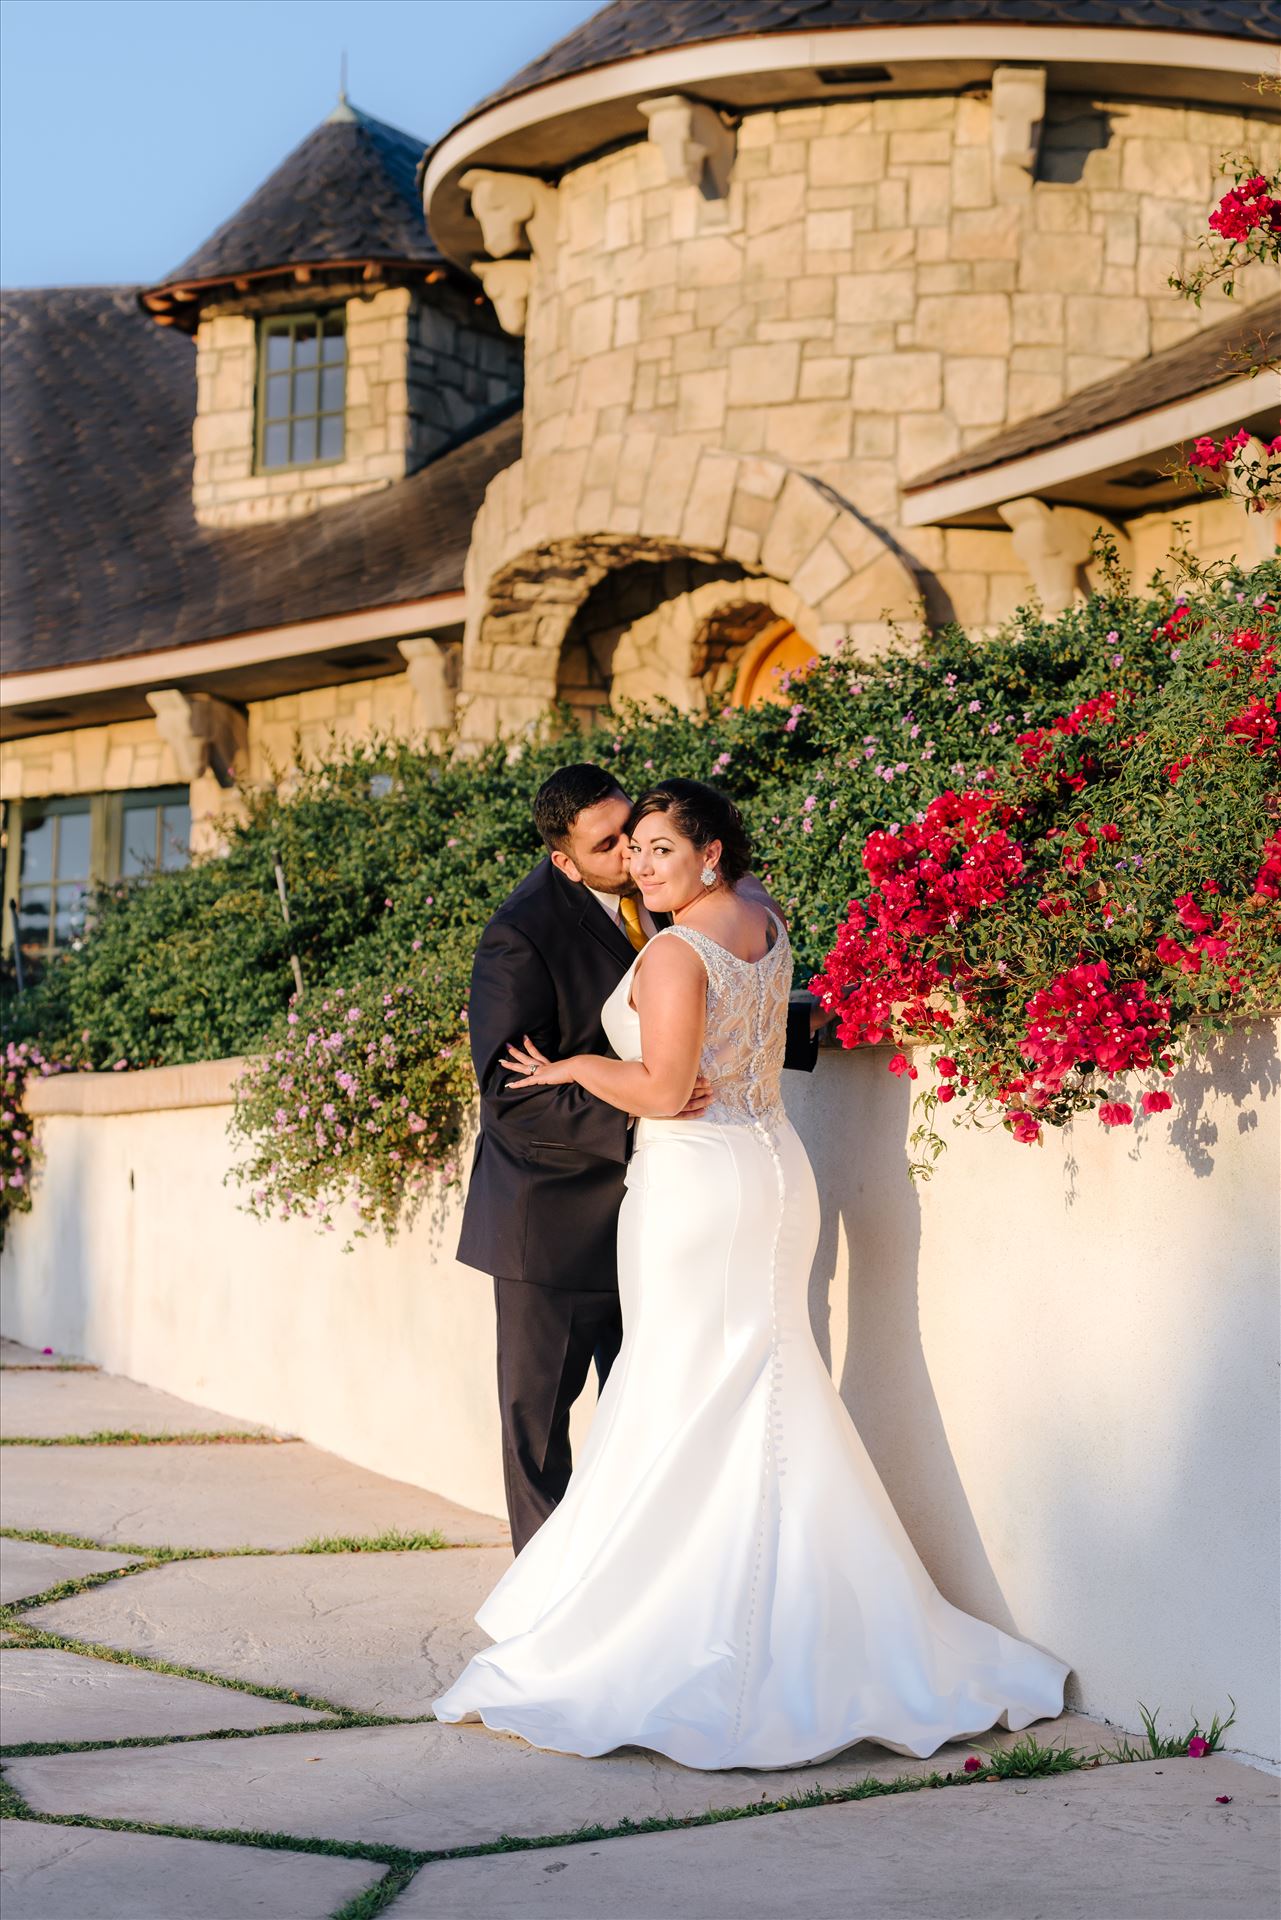 Victoria and Esteban 147 - Sarah Williams of Mirror's Edge Photography captures the gorgeous fairy tale wedding day of Victoria and Esteban at the Castle Noland Wedding Venue in San Luis Obispo, California.  Bride and Groom at sunset in front of Castle Noland romatic by Sarah Williams